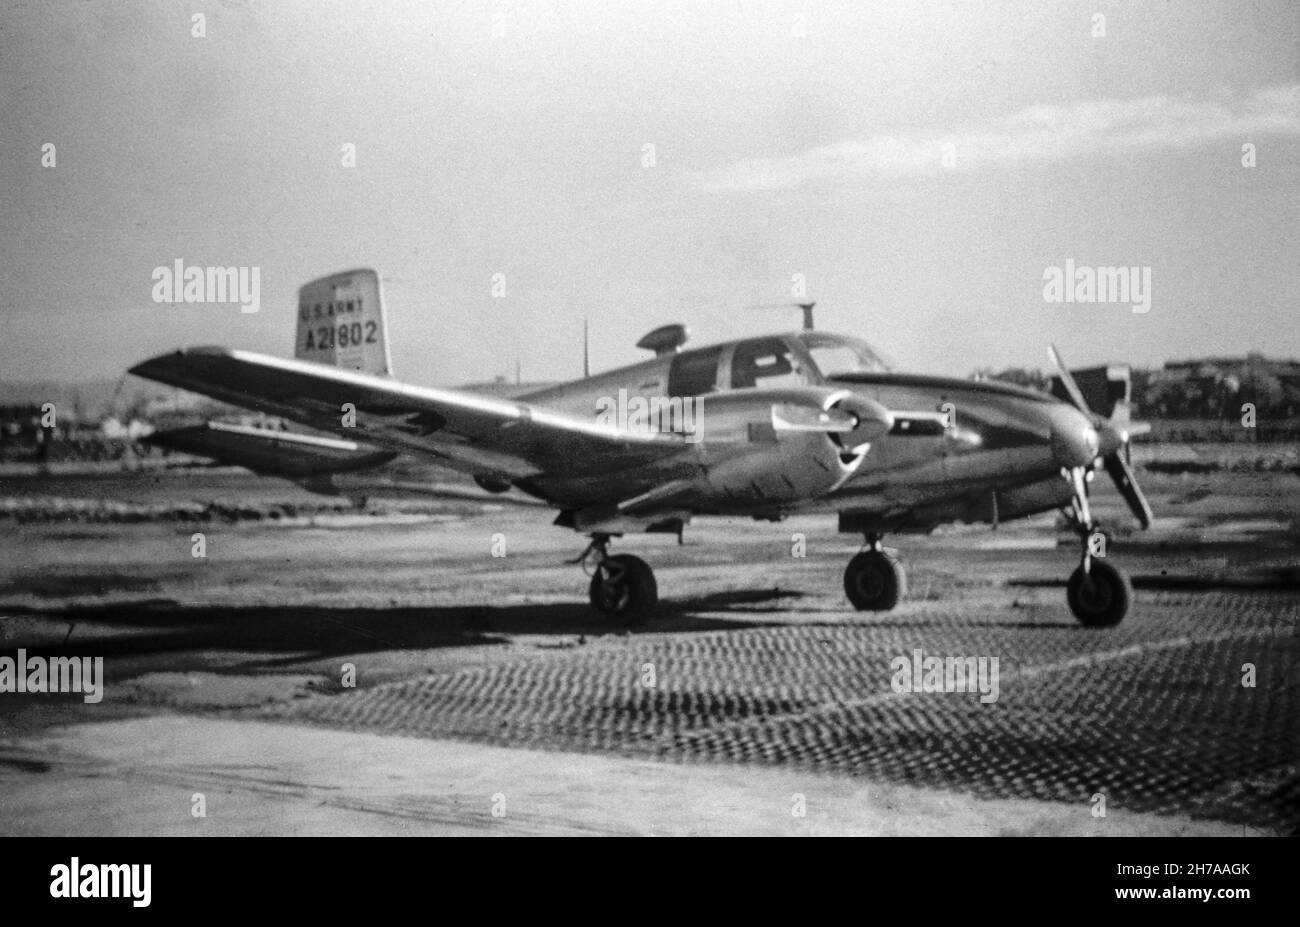 A photograph of a Beech YL-23 Seminole, serial number 52-1802, of the United States Army, taken at Airstrip A-2 near Seoul during the Korean War, in 1953 or 1954. Stock Photo